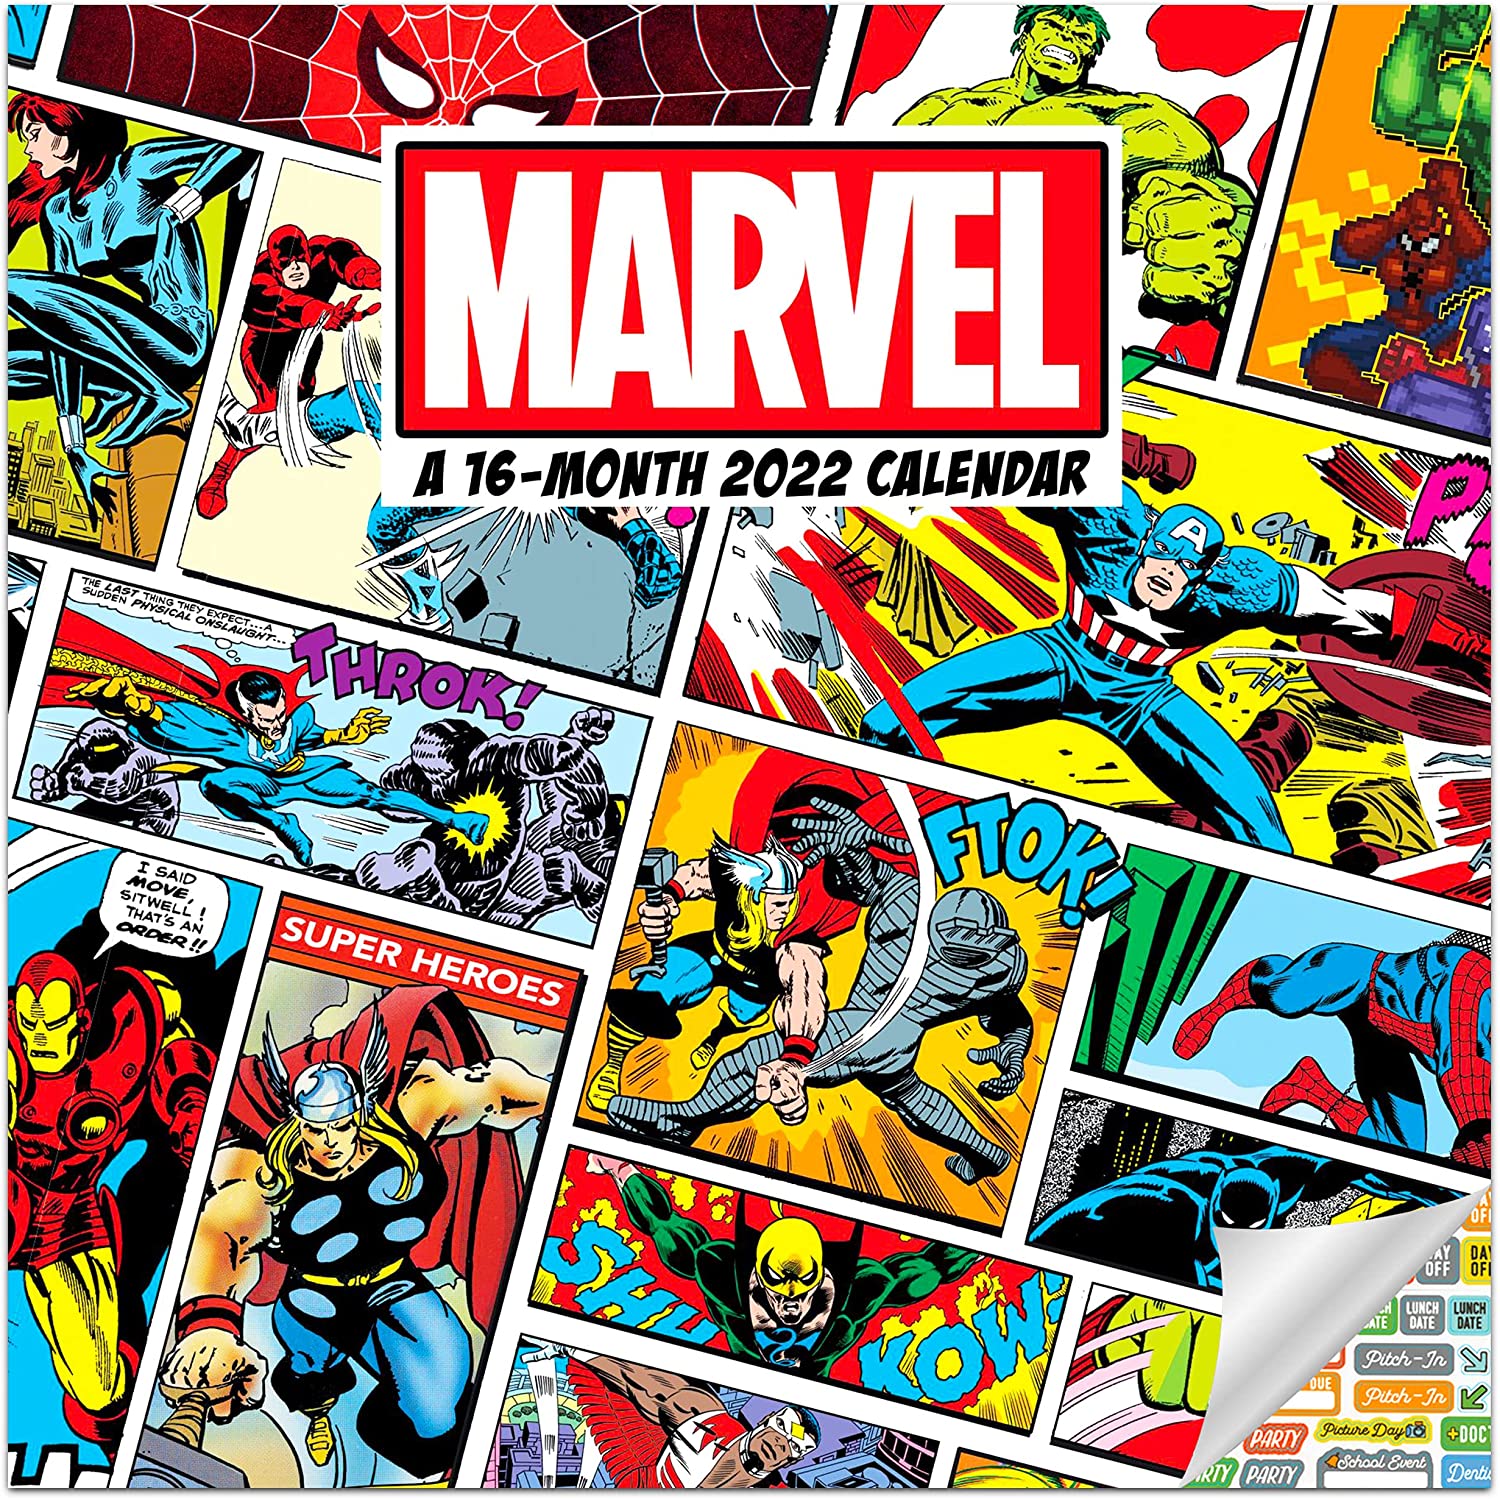 Amazon.com, Marvel Avengers Comics Calendar 2022 - Deluxe 2022 Marvel Comics Wall Calendar Bundle with Over 100 Calendar Stickers (MCU Gifts, Office Supplies), Office Products